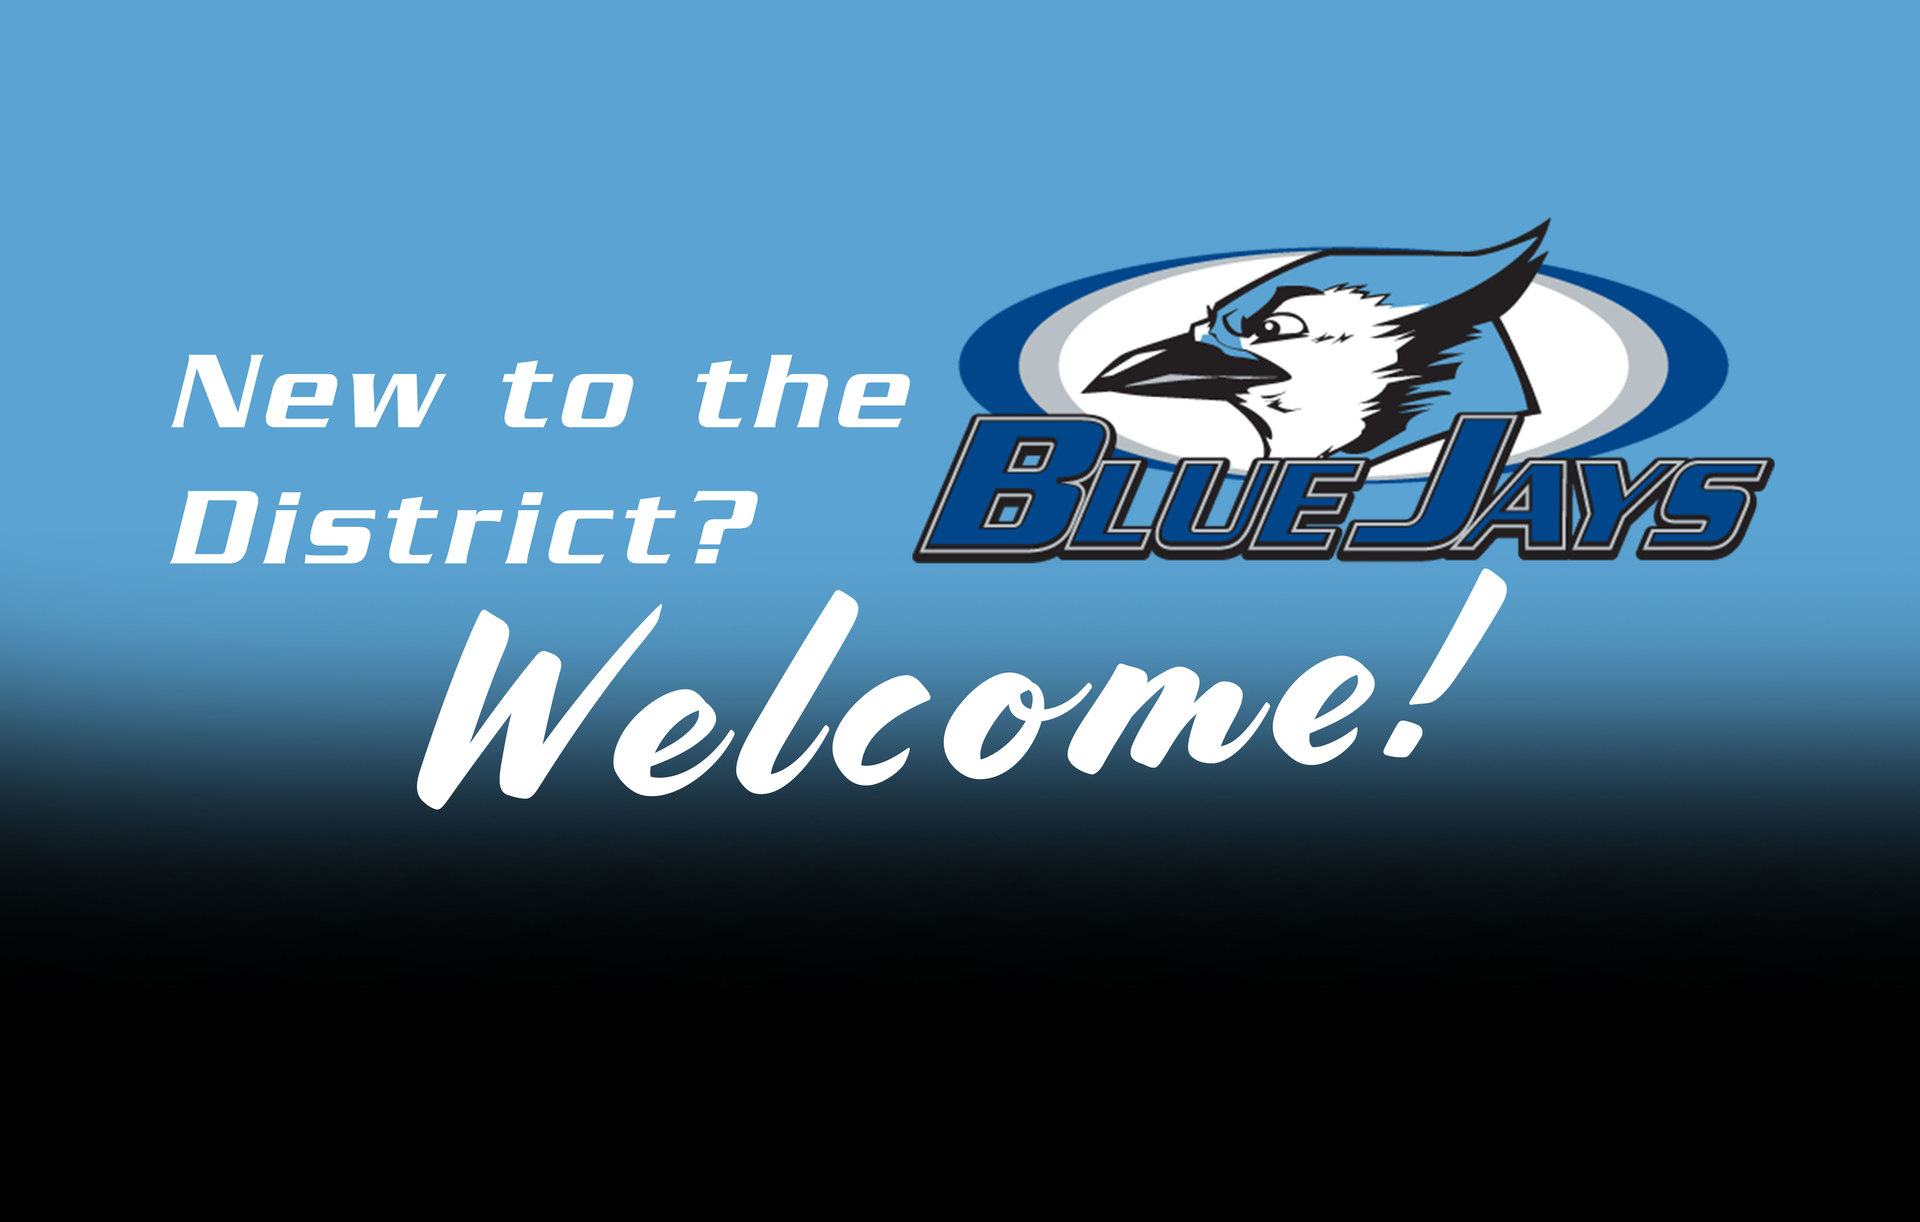 New to the district? Welcome